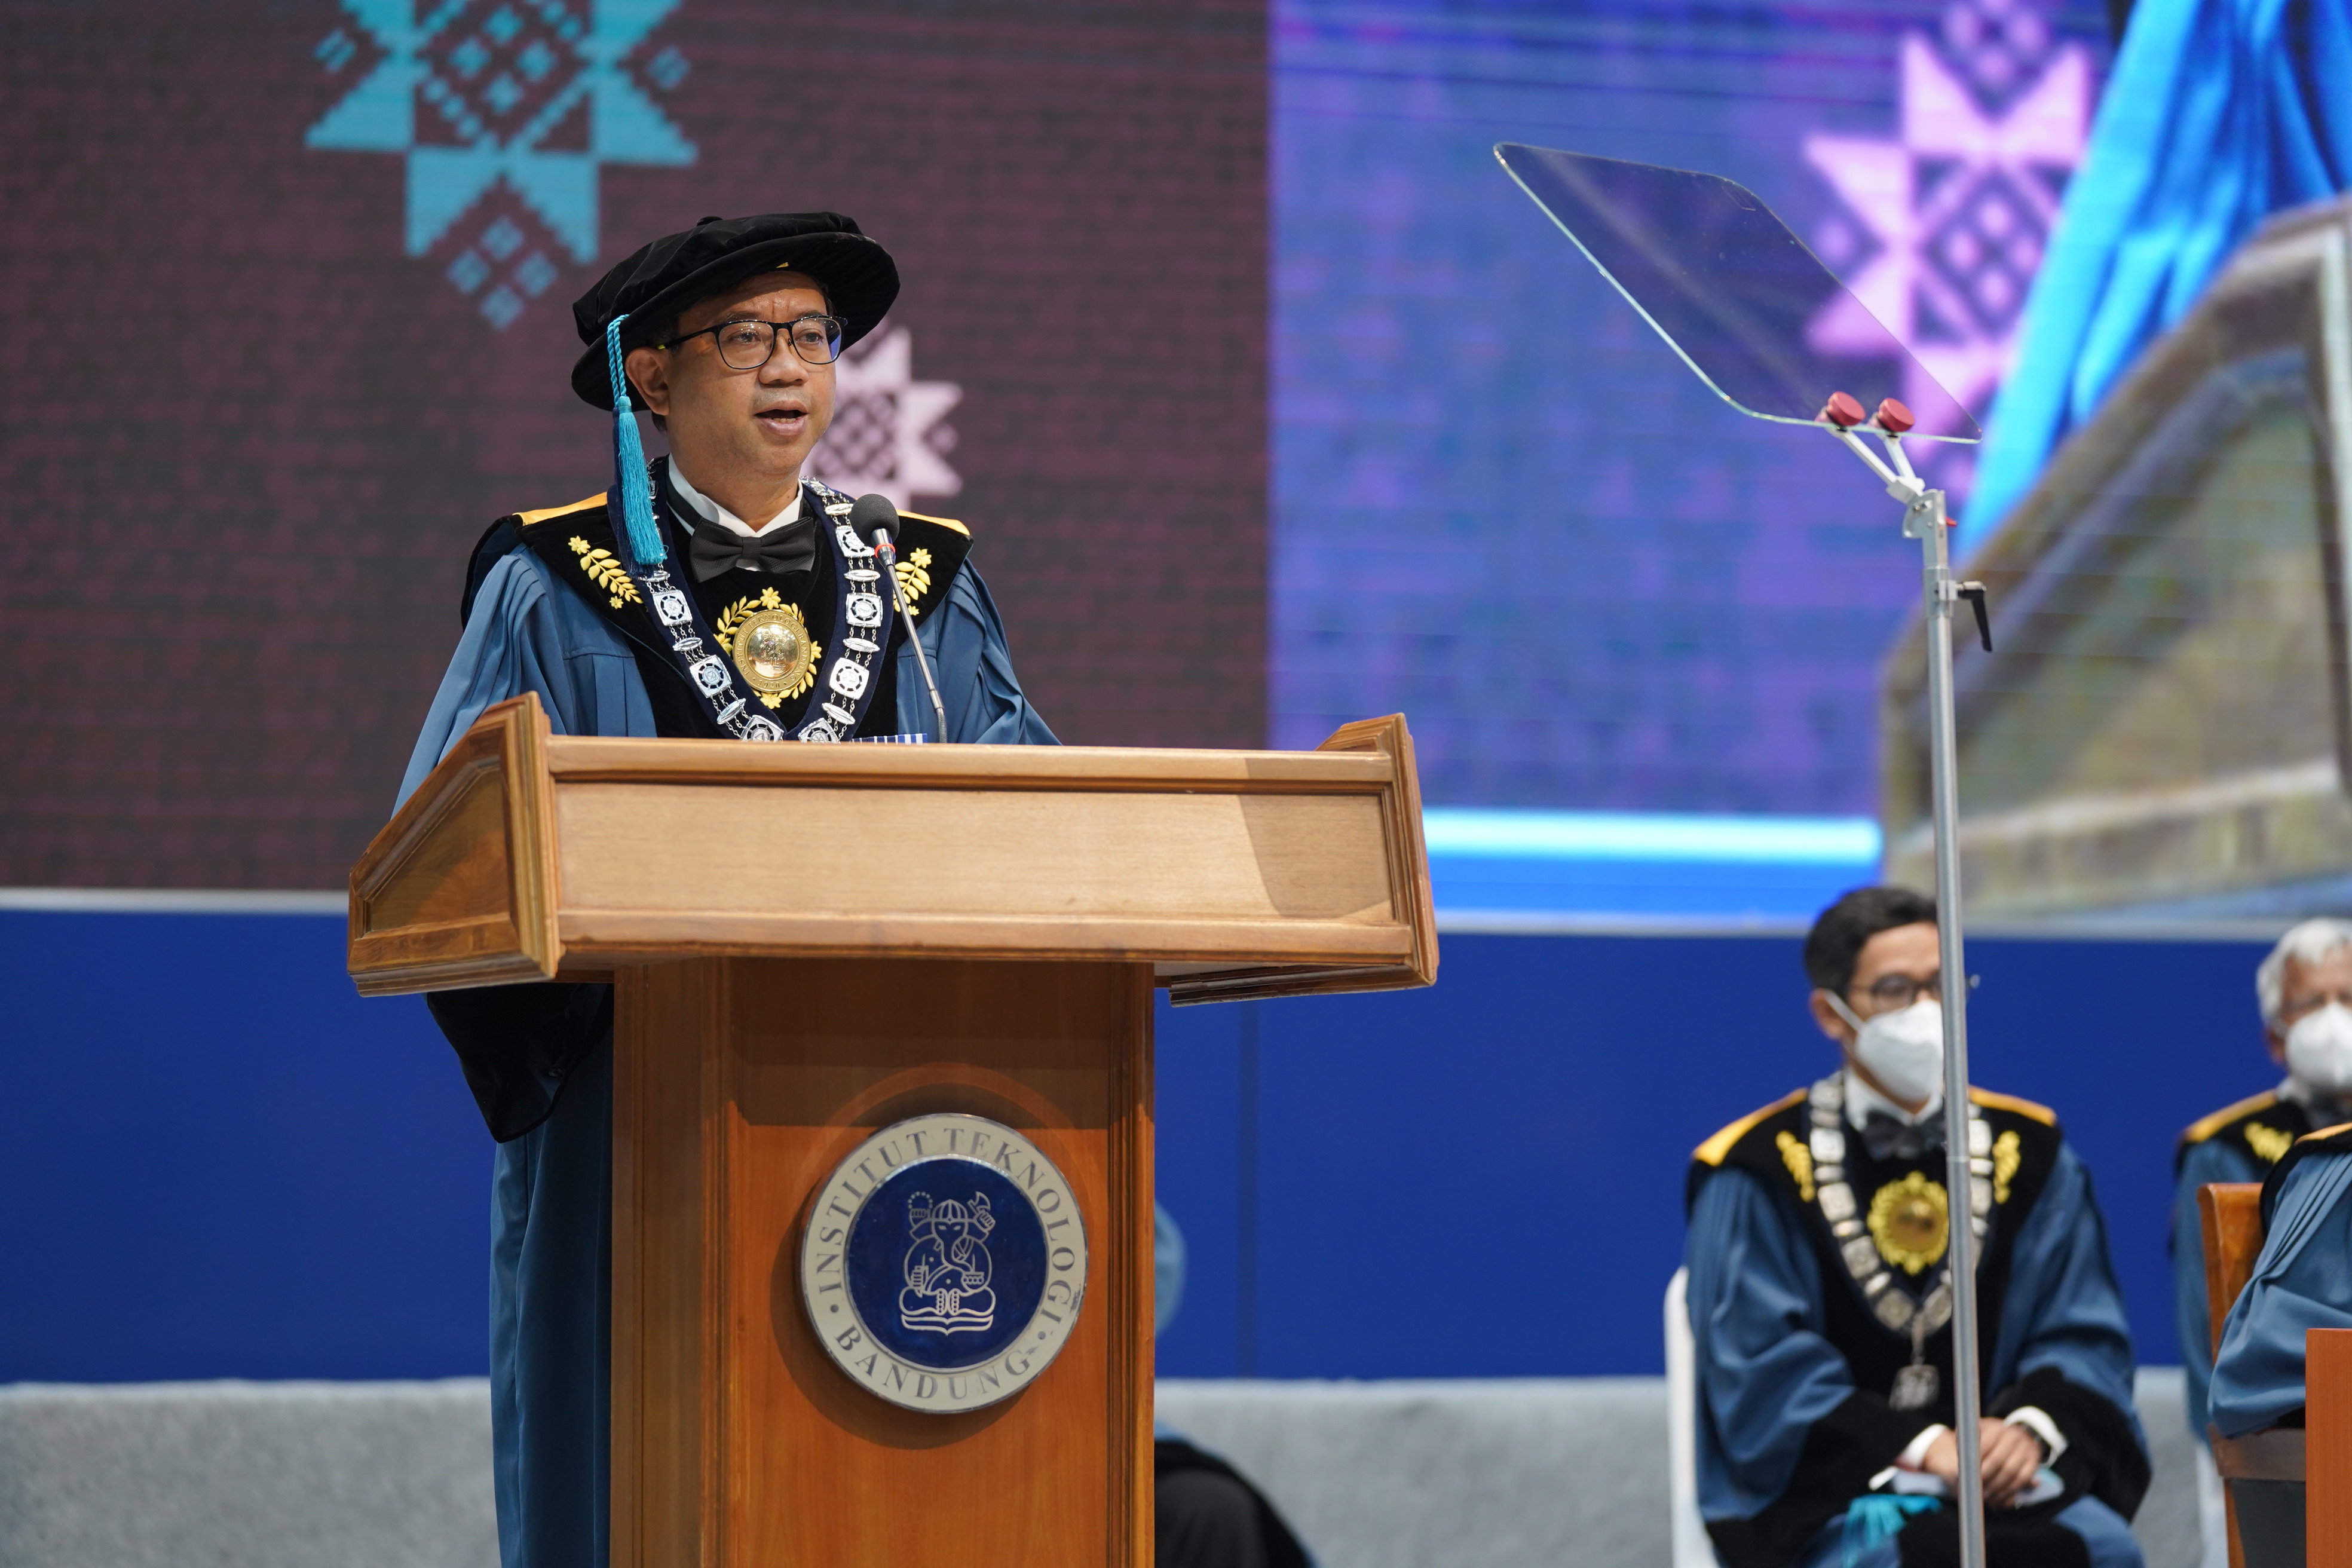 speech-from-itb-rector-at-the-october-2022-graduation-research-culture-is-important-to-actualize-the-knowledge-society